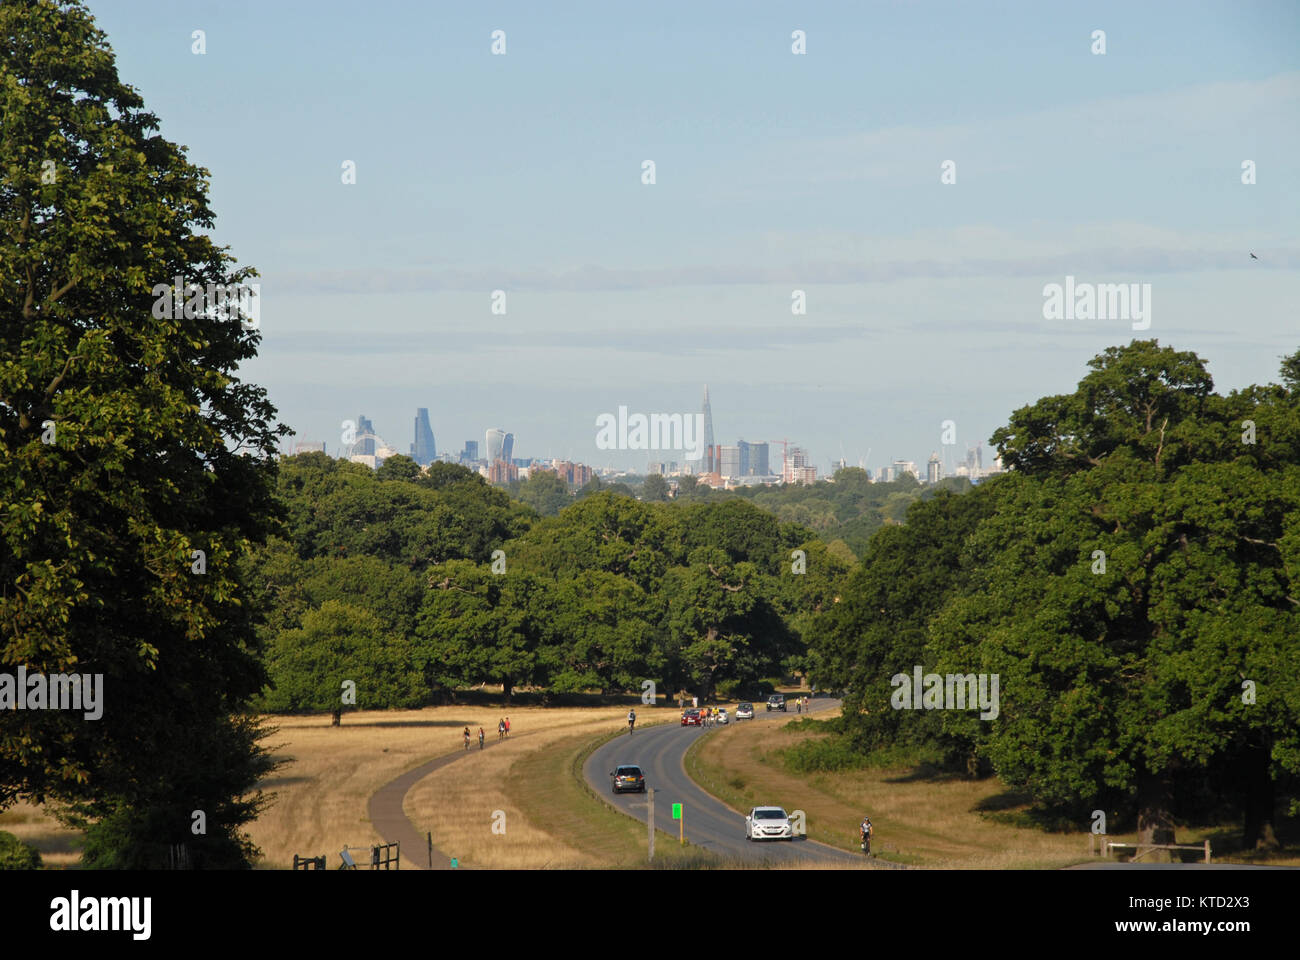 London, United Kingdom - August 9, 2015: View of the skyline of London from Richmond Park Stock Photo